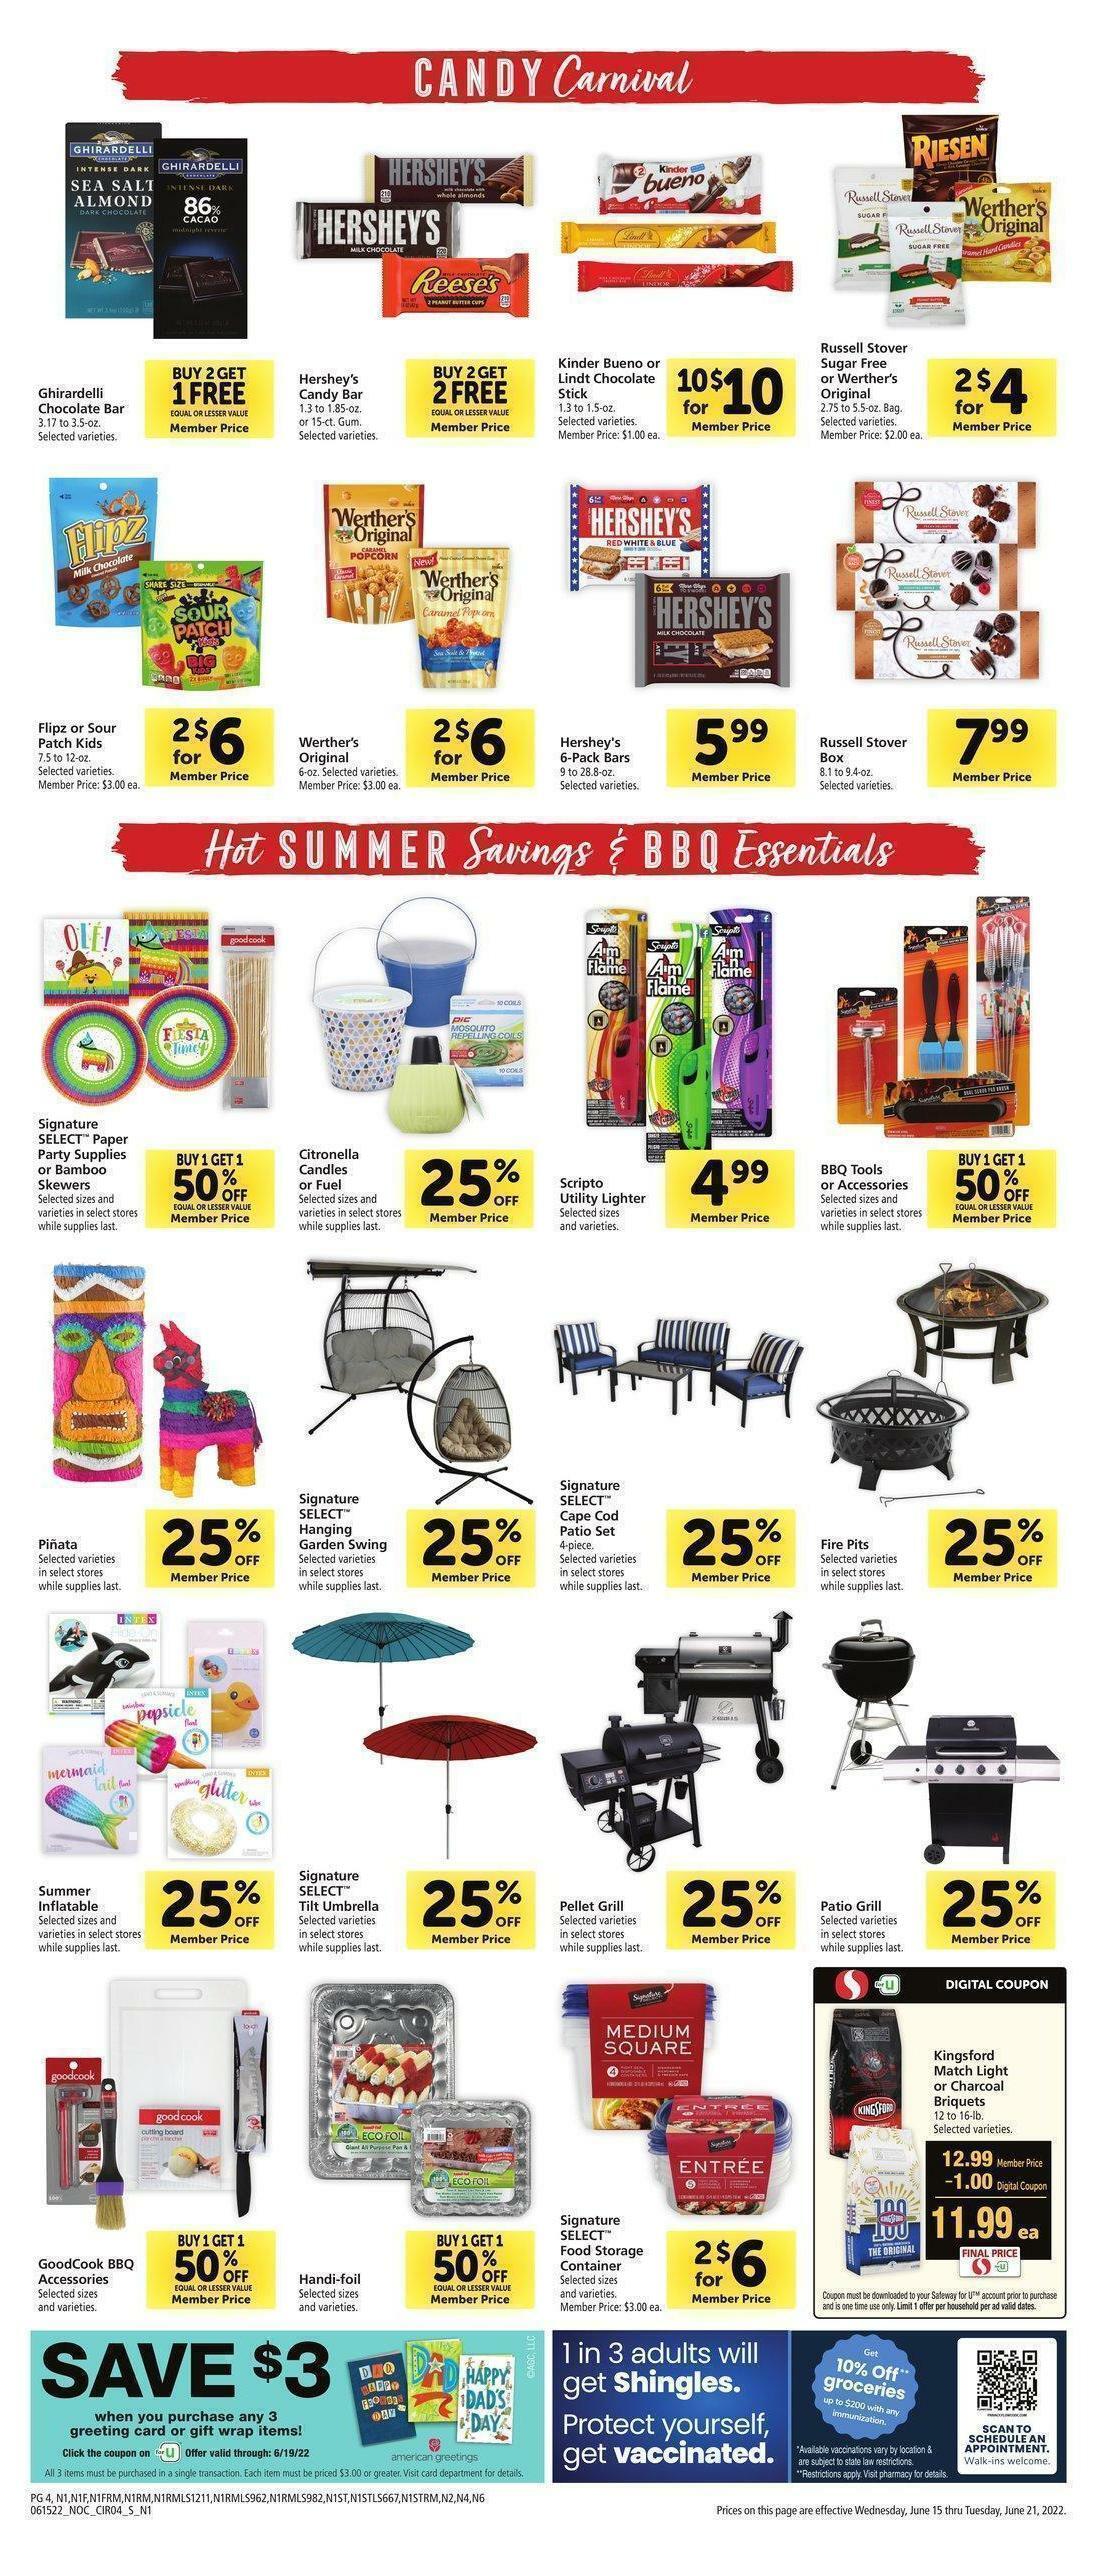 Safeway Weekly Ad from June 15